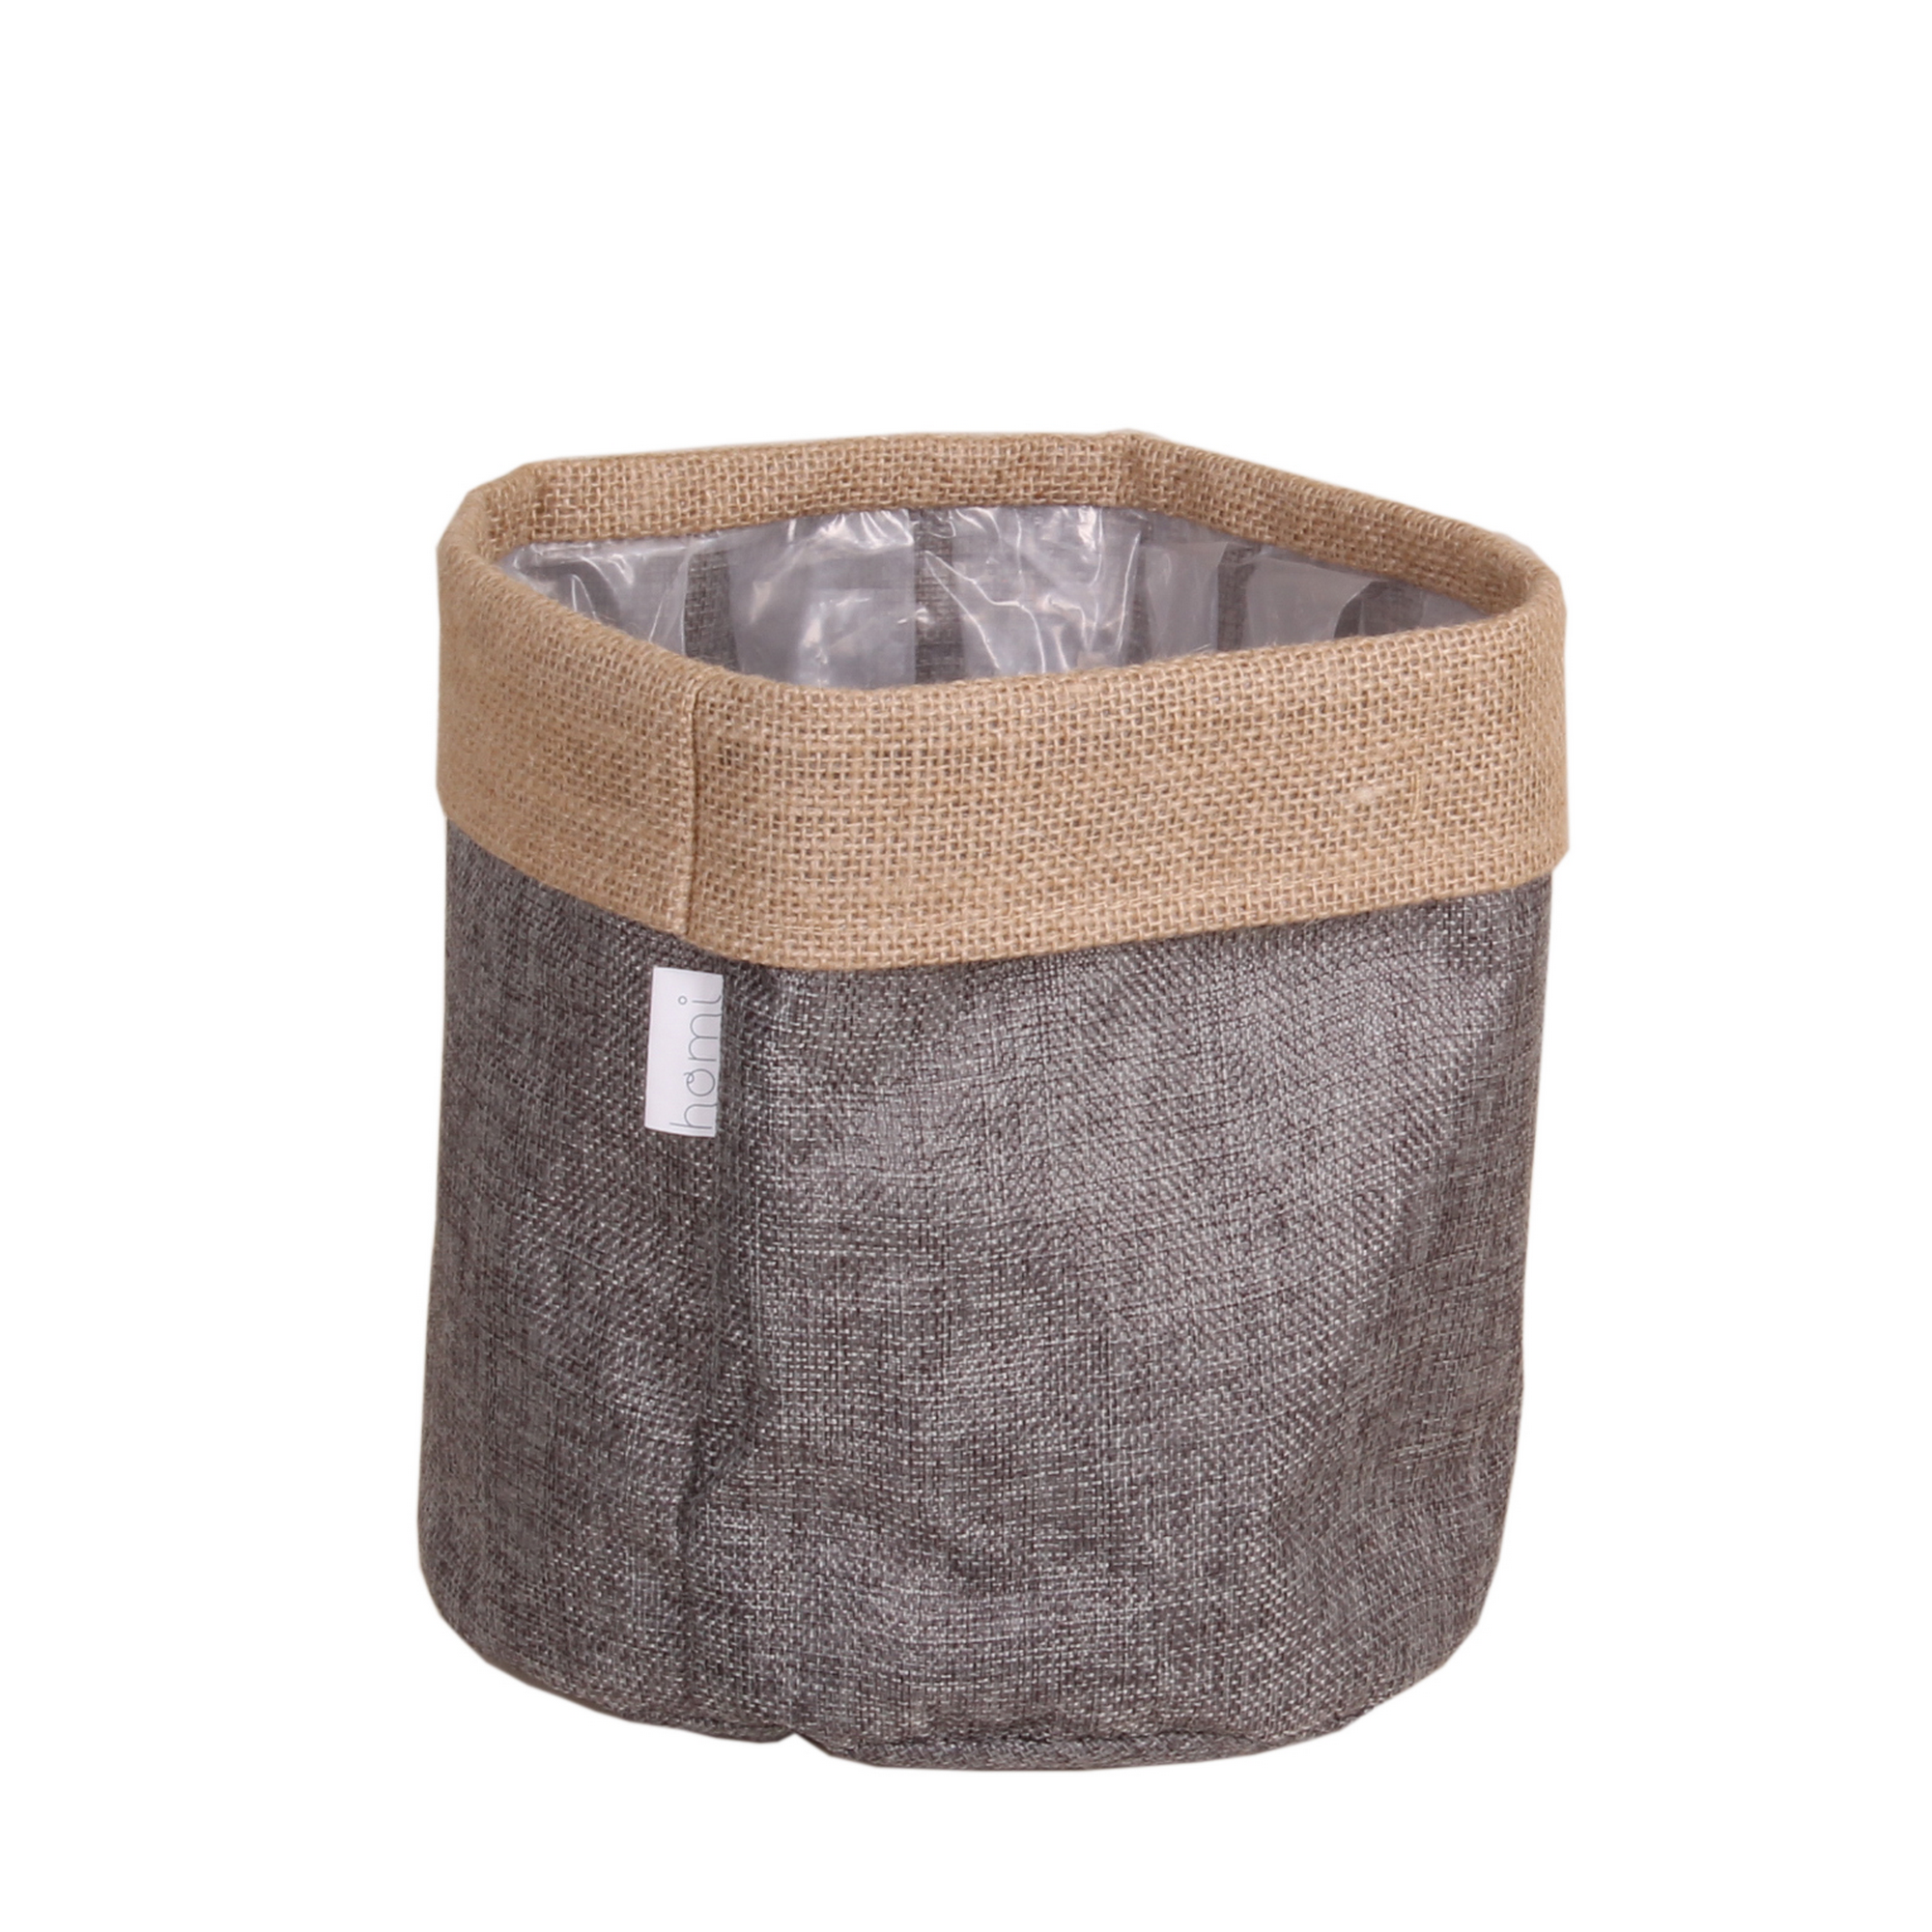 Pflanzkorb Jute/Polyester natur/grau Ø 30 x 30 cm + product picture